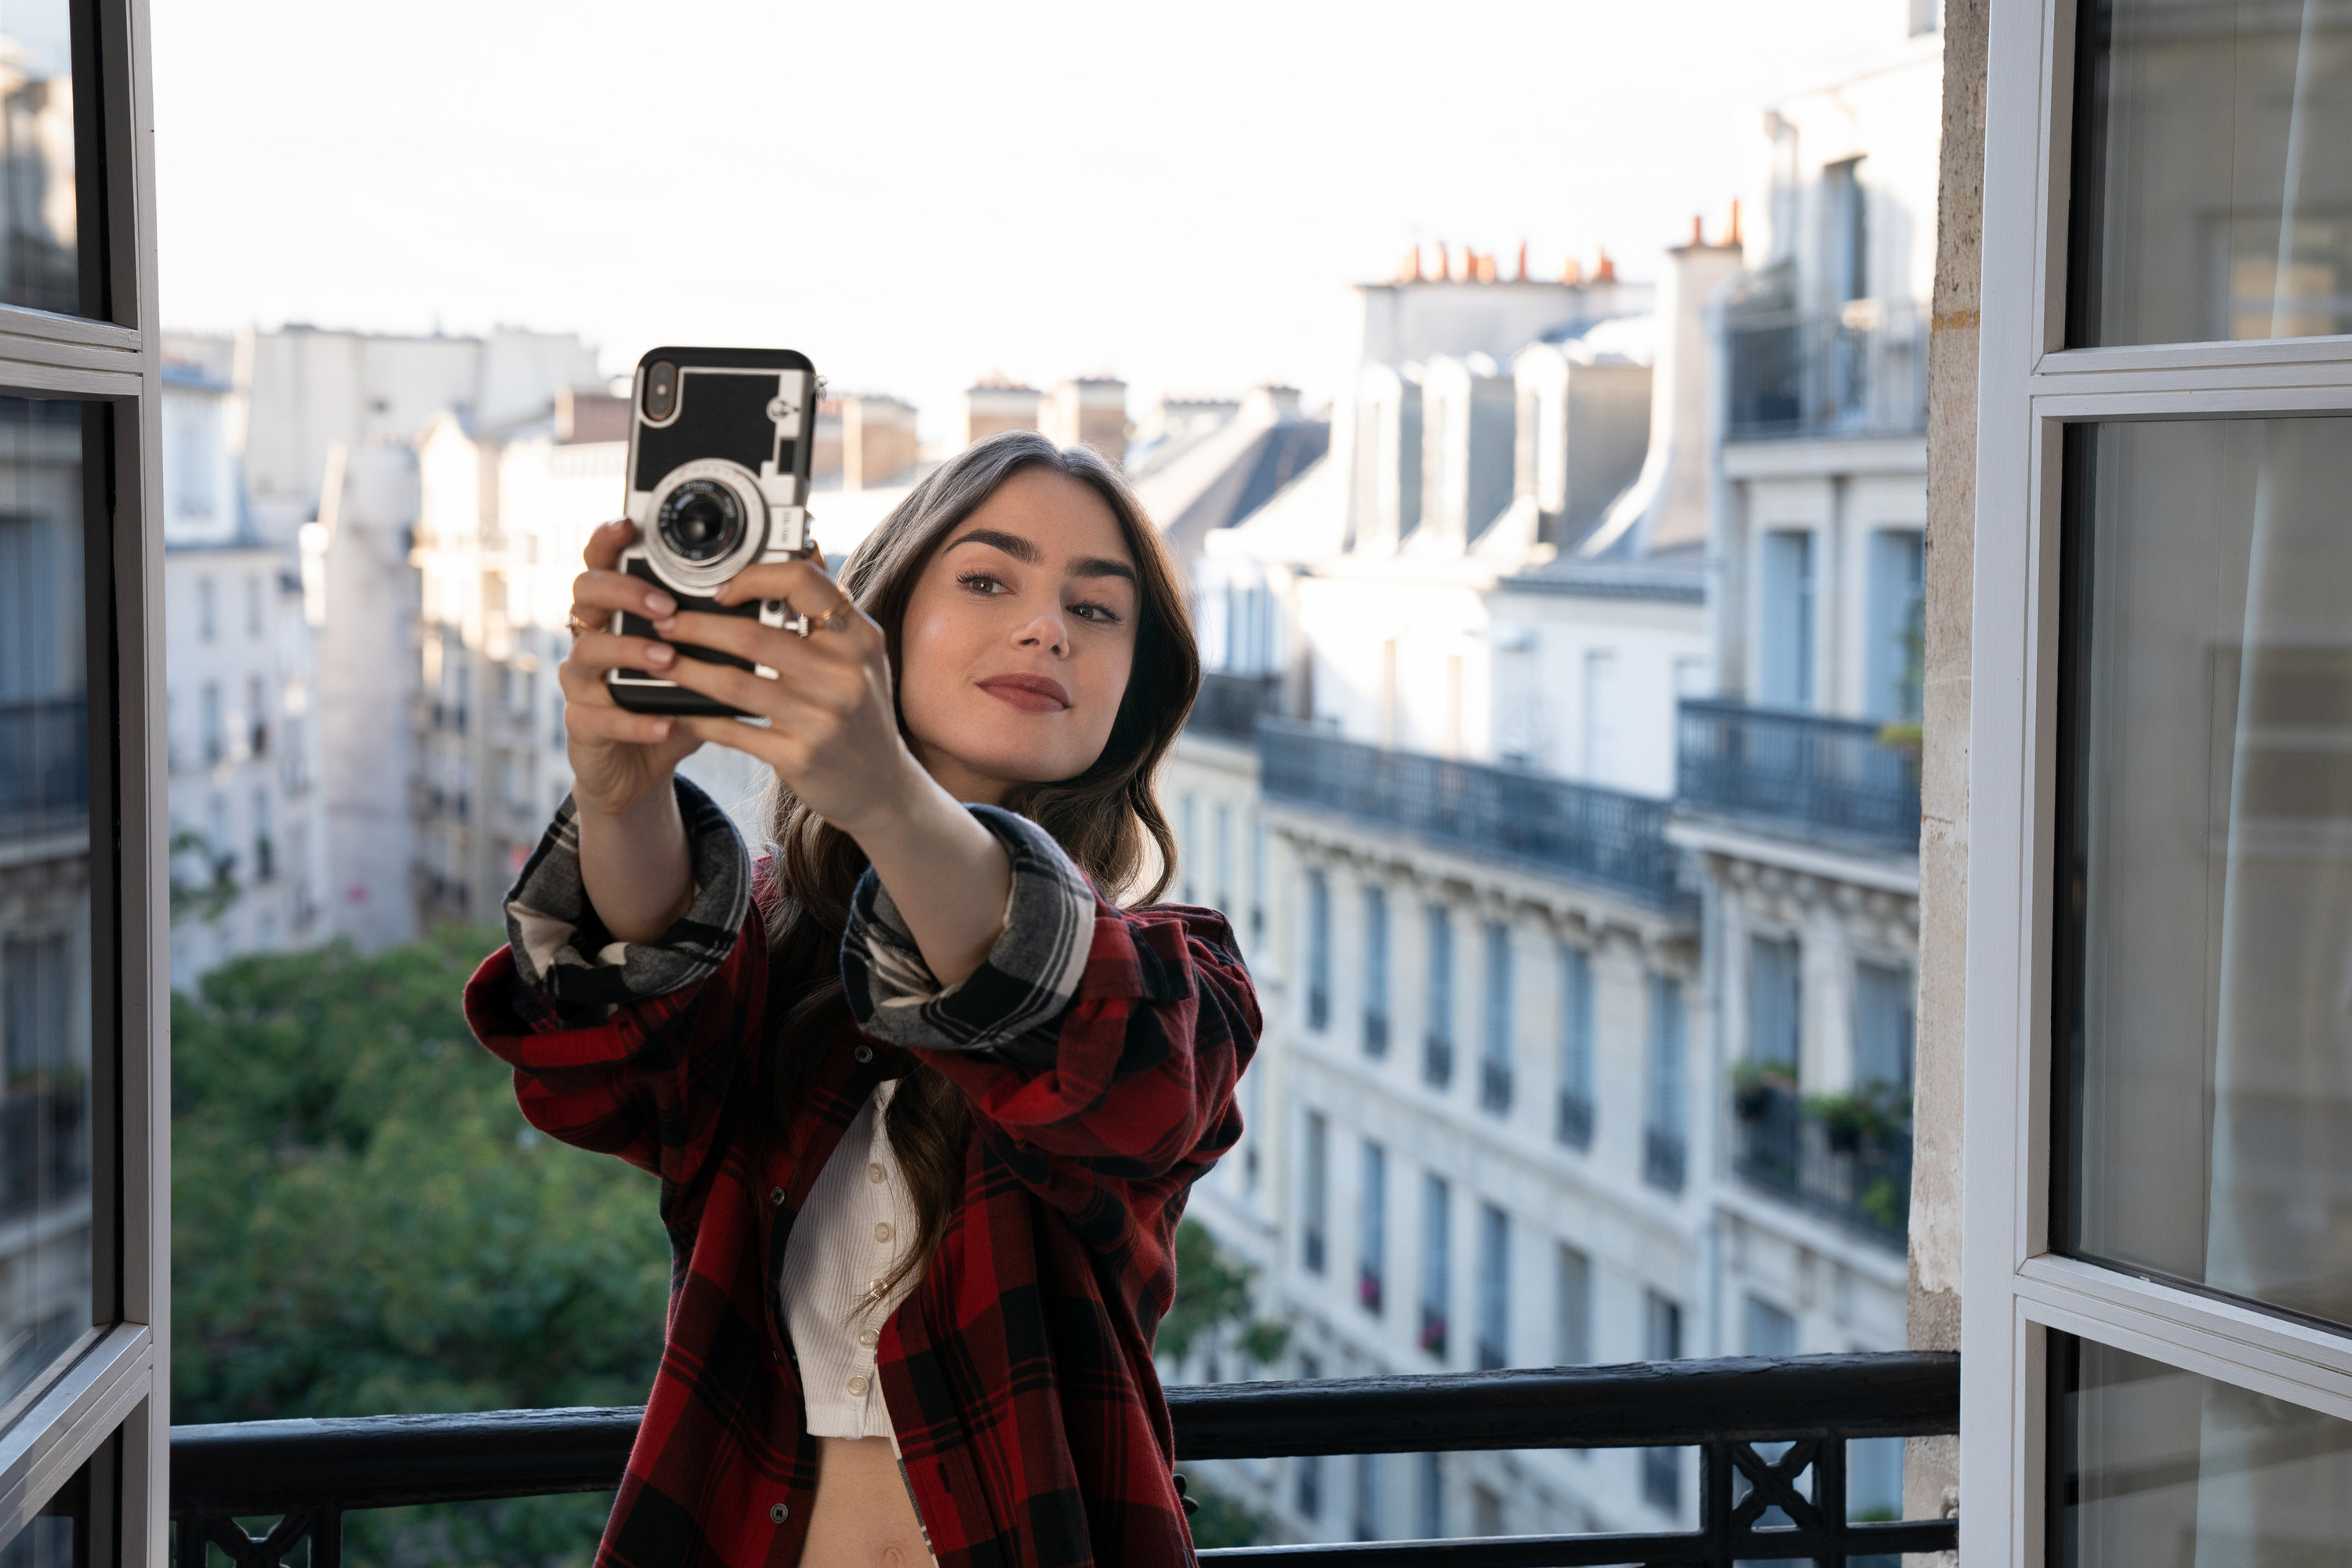 Emily taking a selfie with the Paris skyline behind her